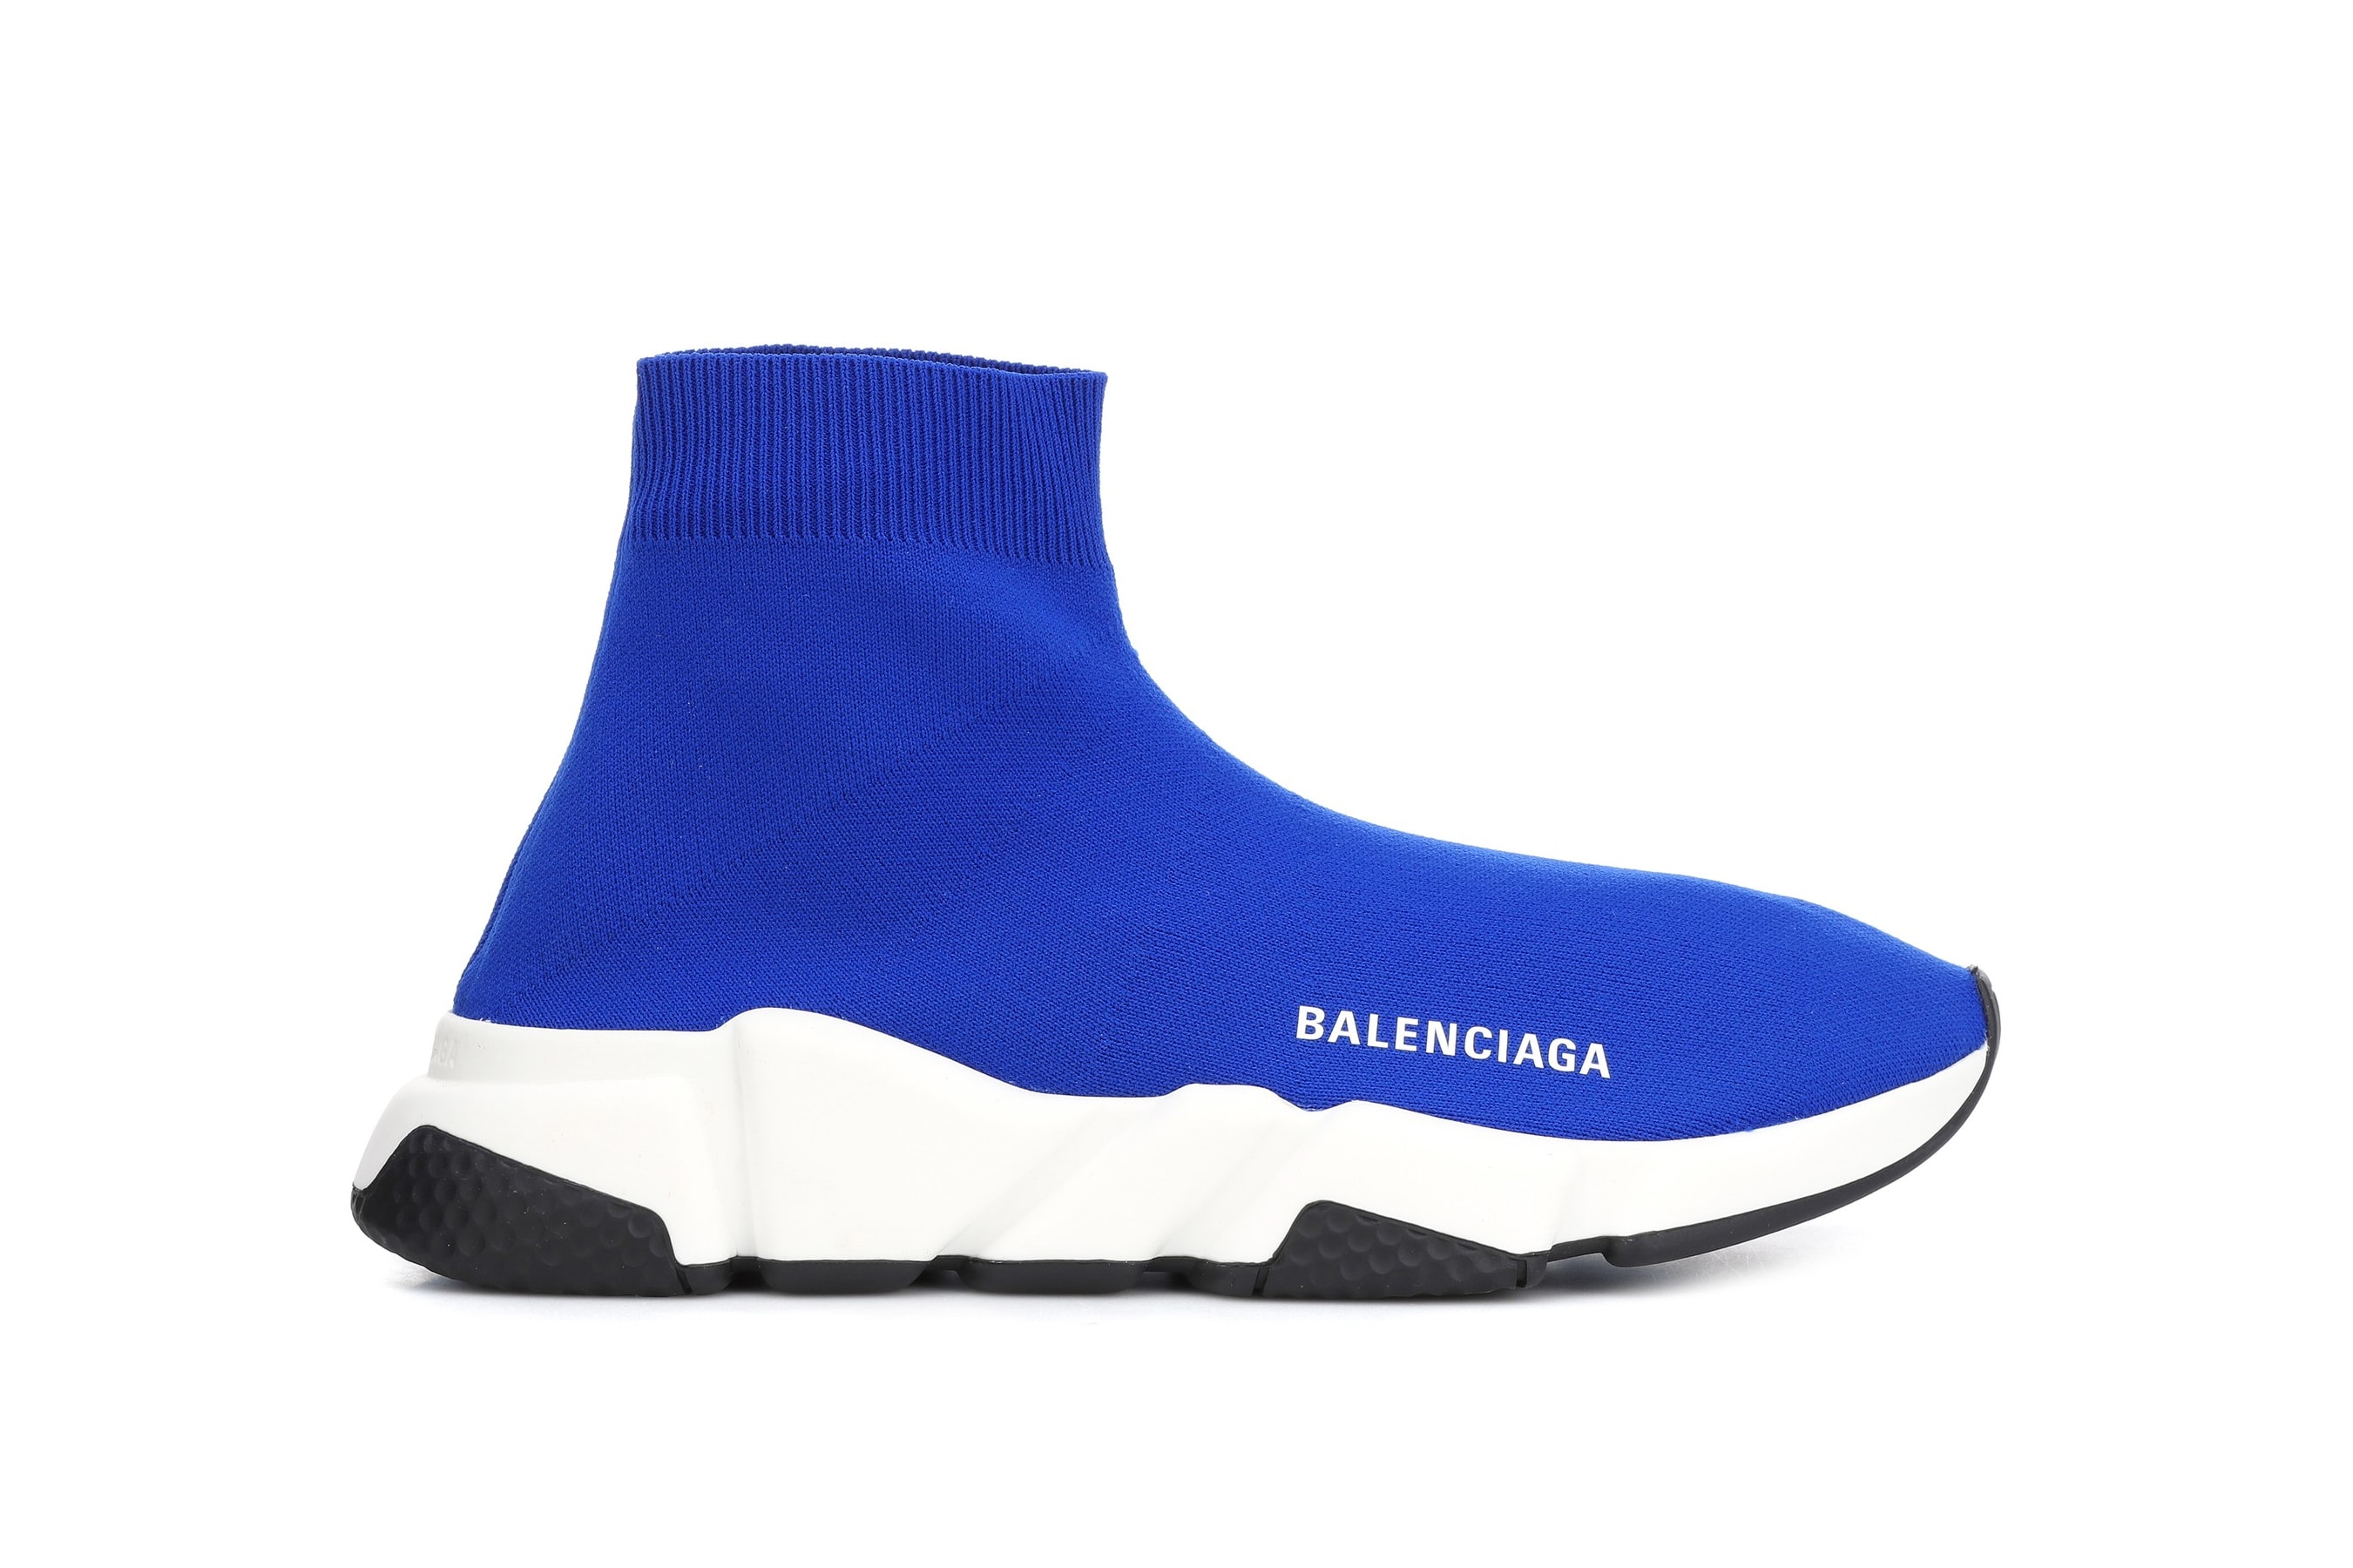 Balenciaga Speed Trailers in "Electric Blue" Sock Sneakers Runners Shoes